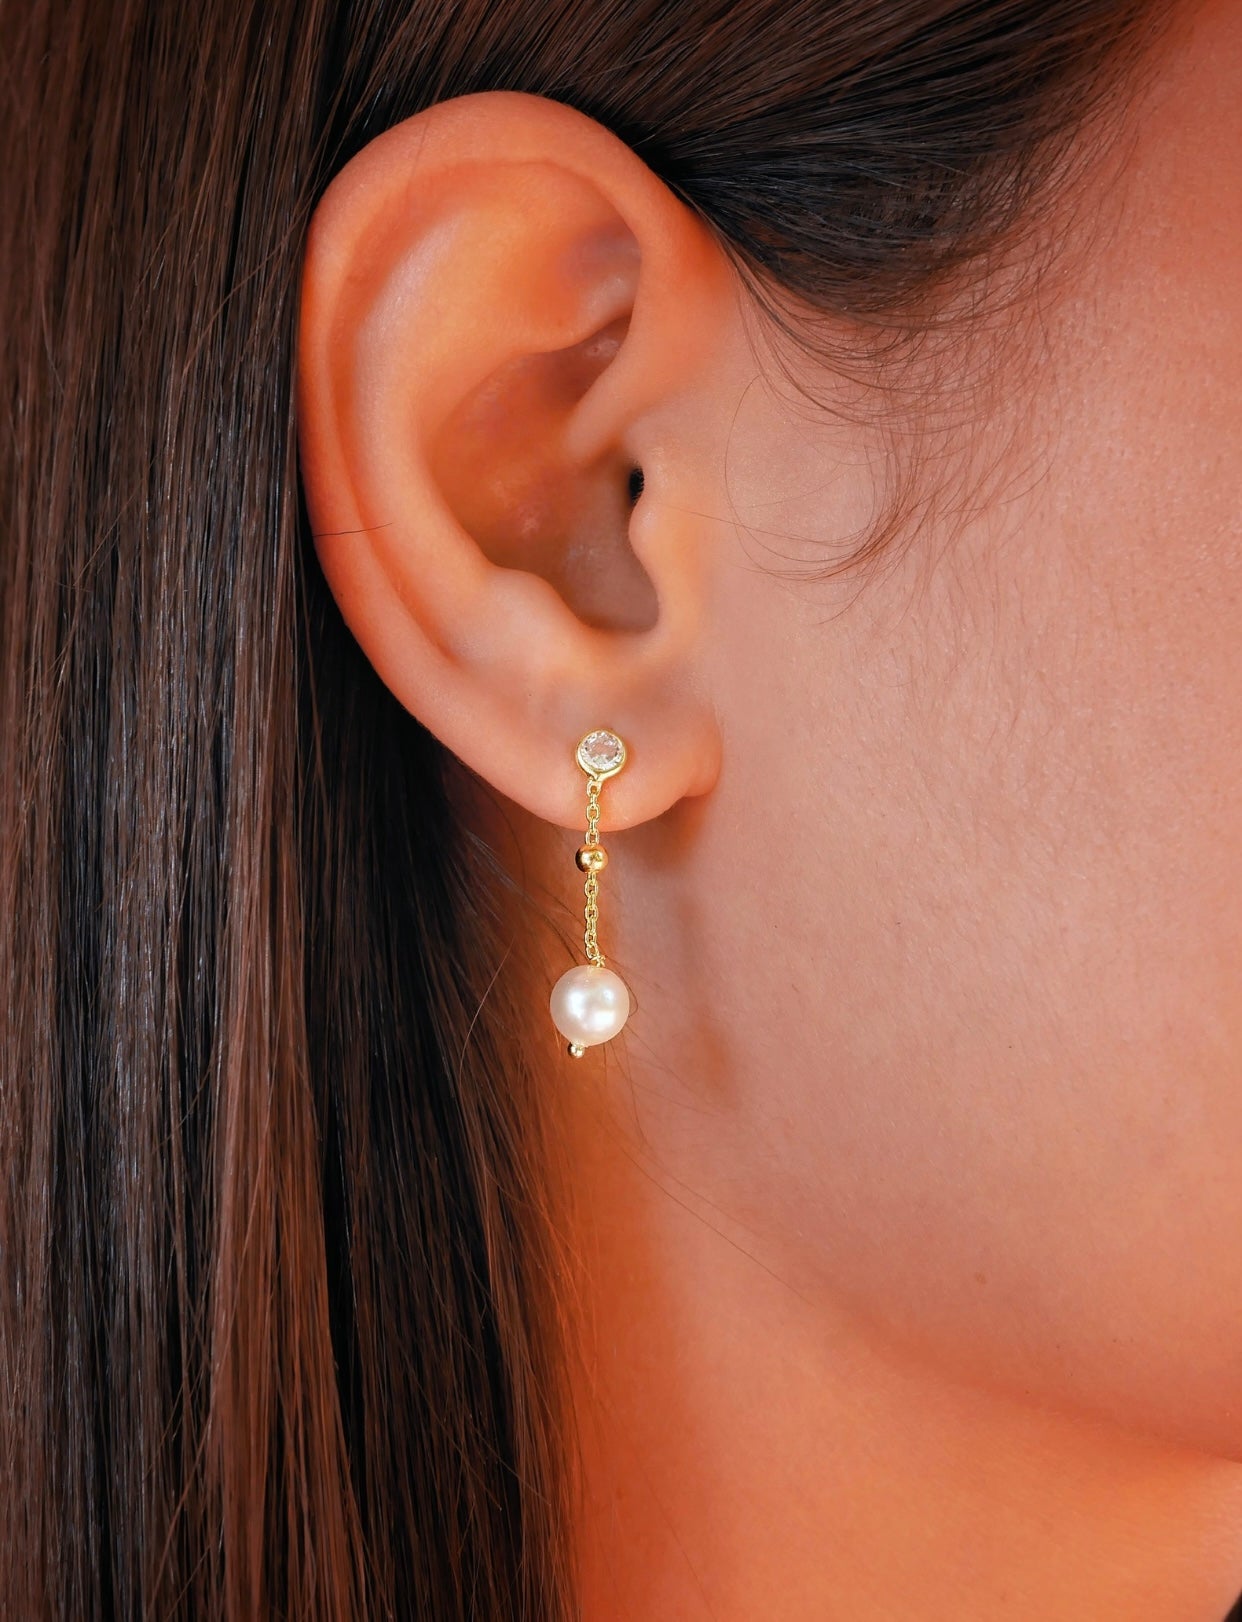 PEARL Classic Earrings with Swarovski Elements